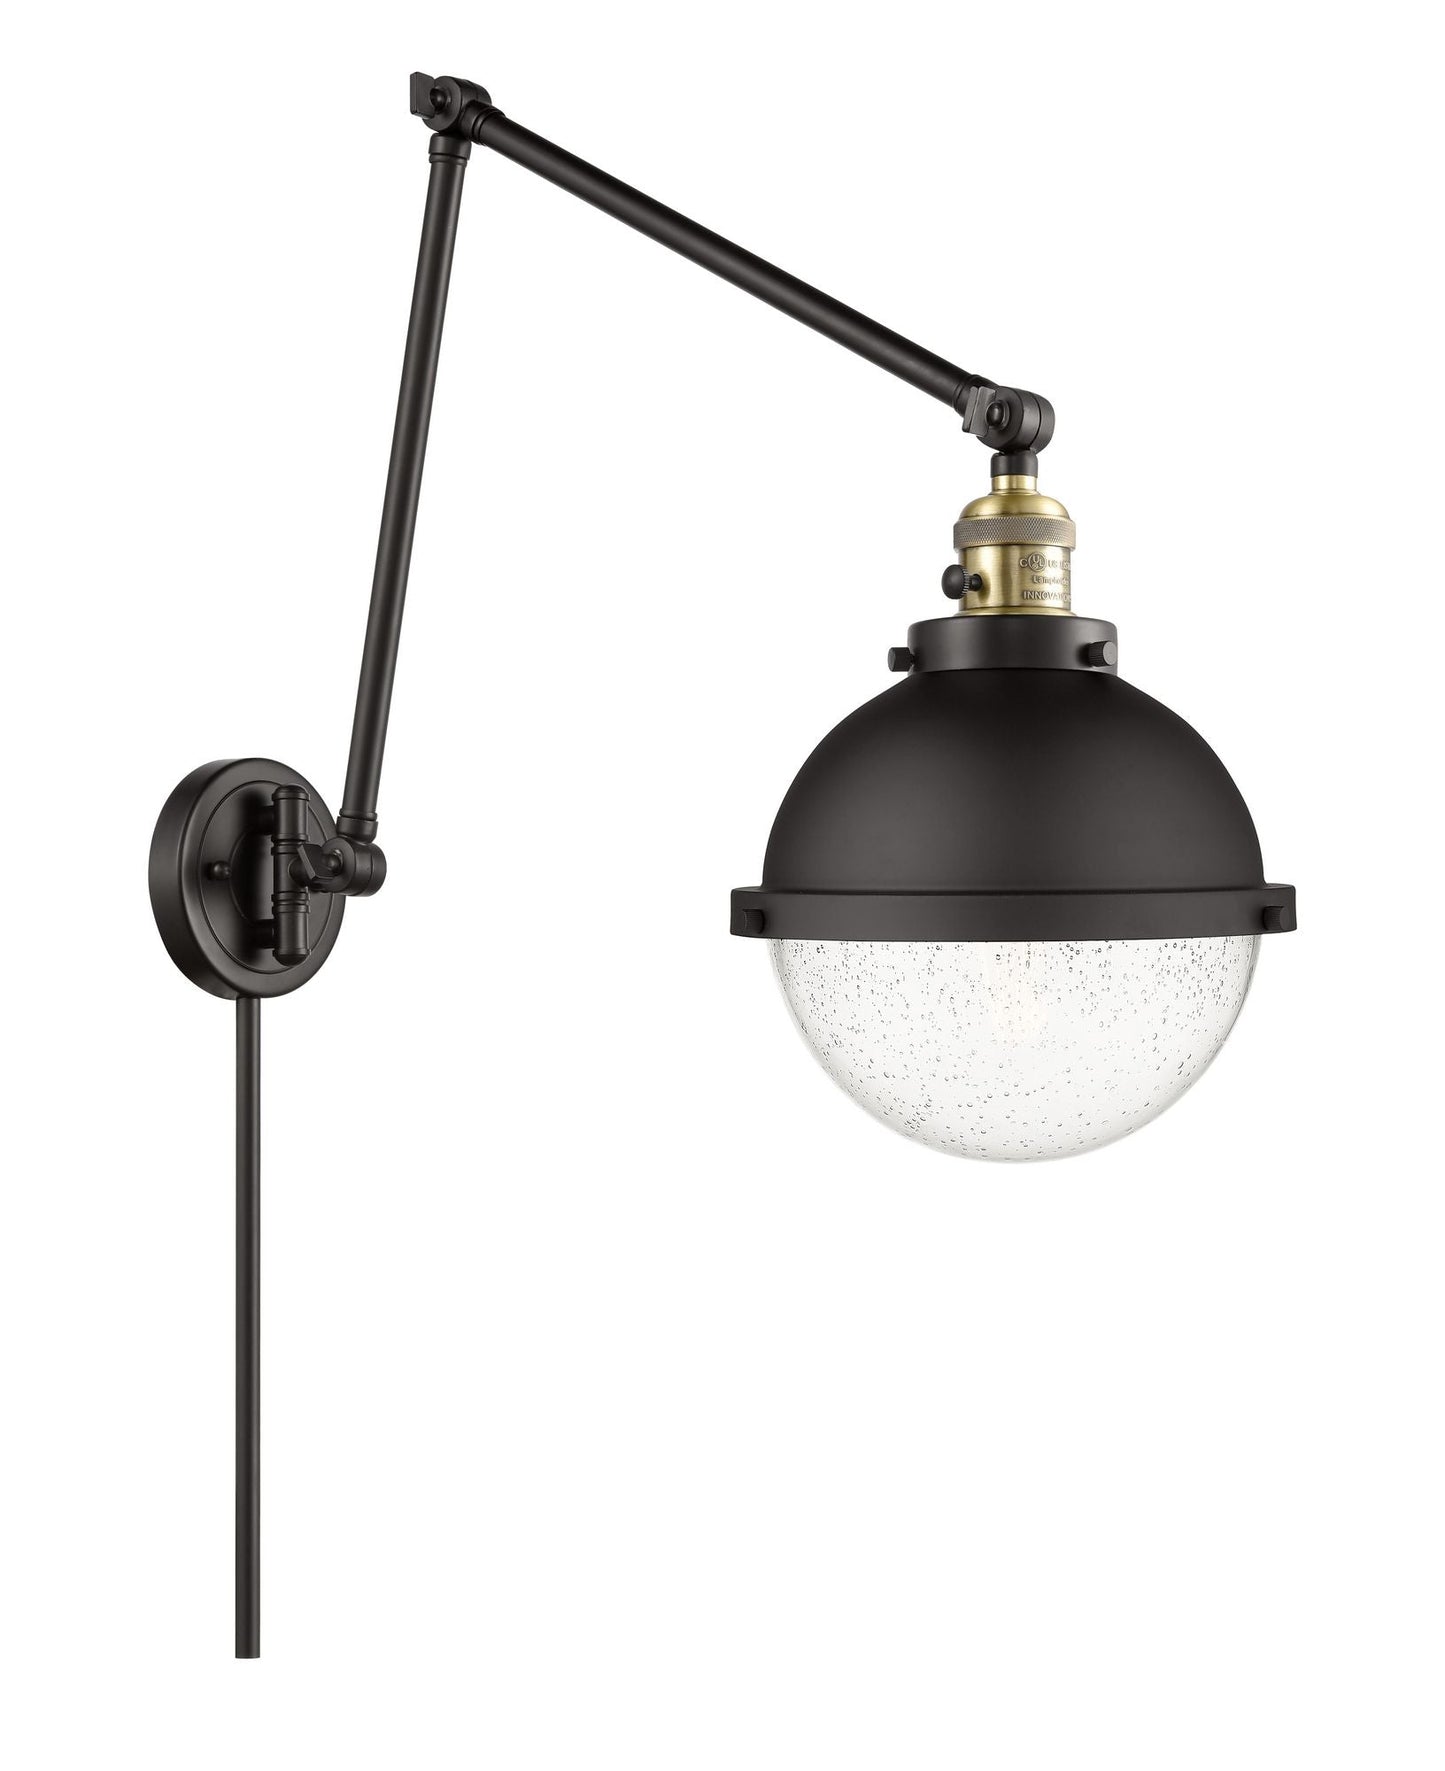 1-Light 9" Black Antique Brass Seedy Hampden Swing Arm With Switch - Globe-Orb Seedy Glass - Incandesent Or LED Bulbs